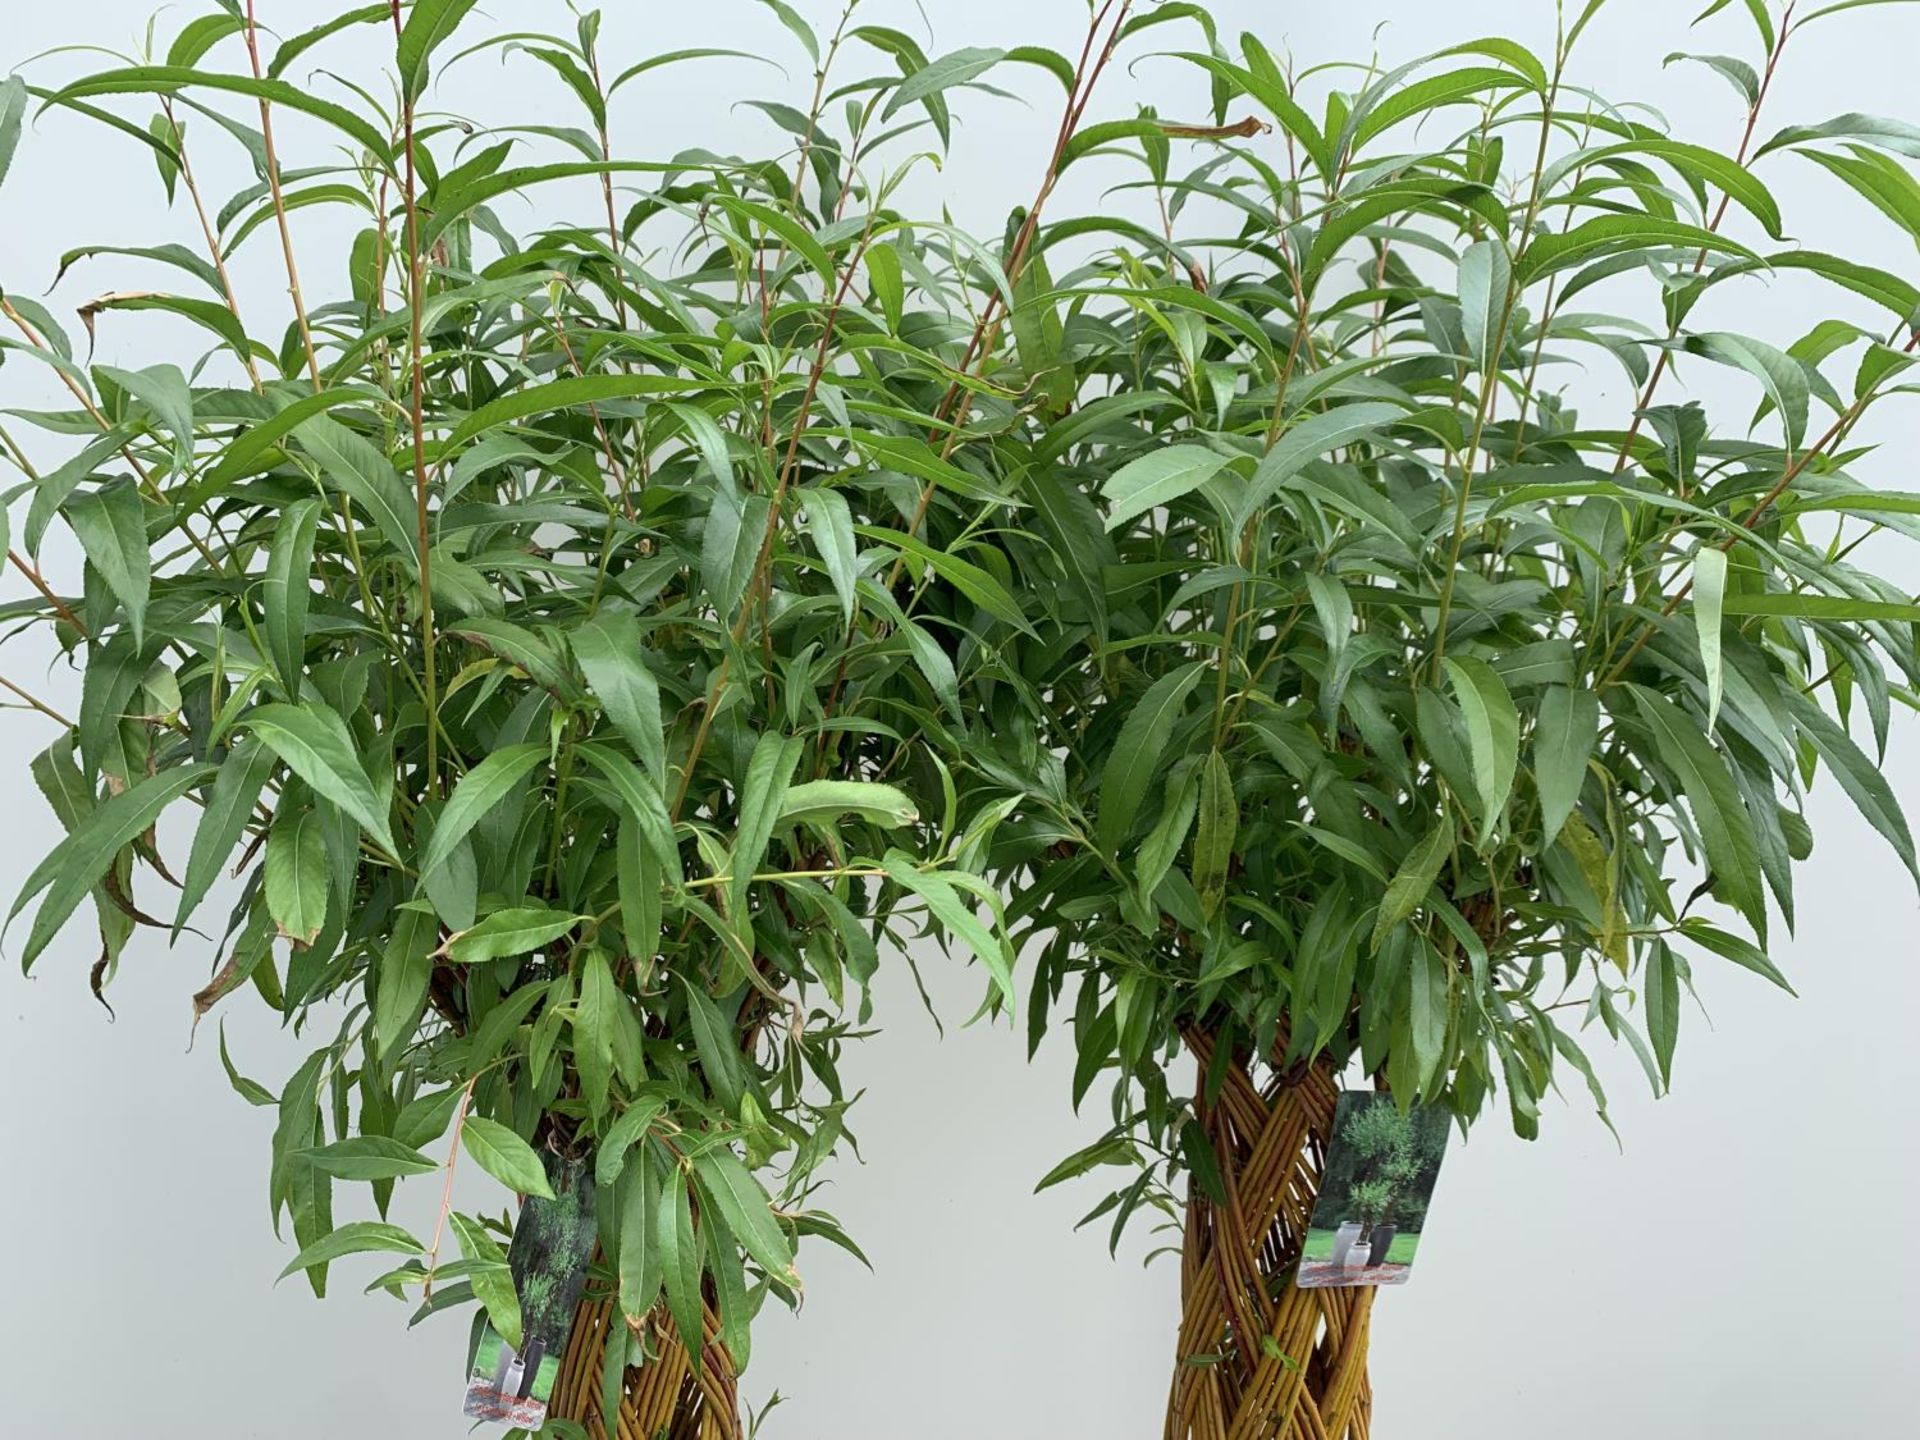 TWO SALIX LIVING WILLOW TREES IN 7.5 LTR POTS OVER 2 METRES IN HEIGHT TO BE SOLD FOR THE TWO PLUS - Image 17 of 22